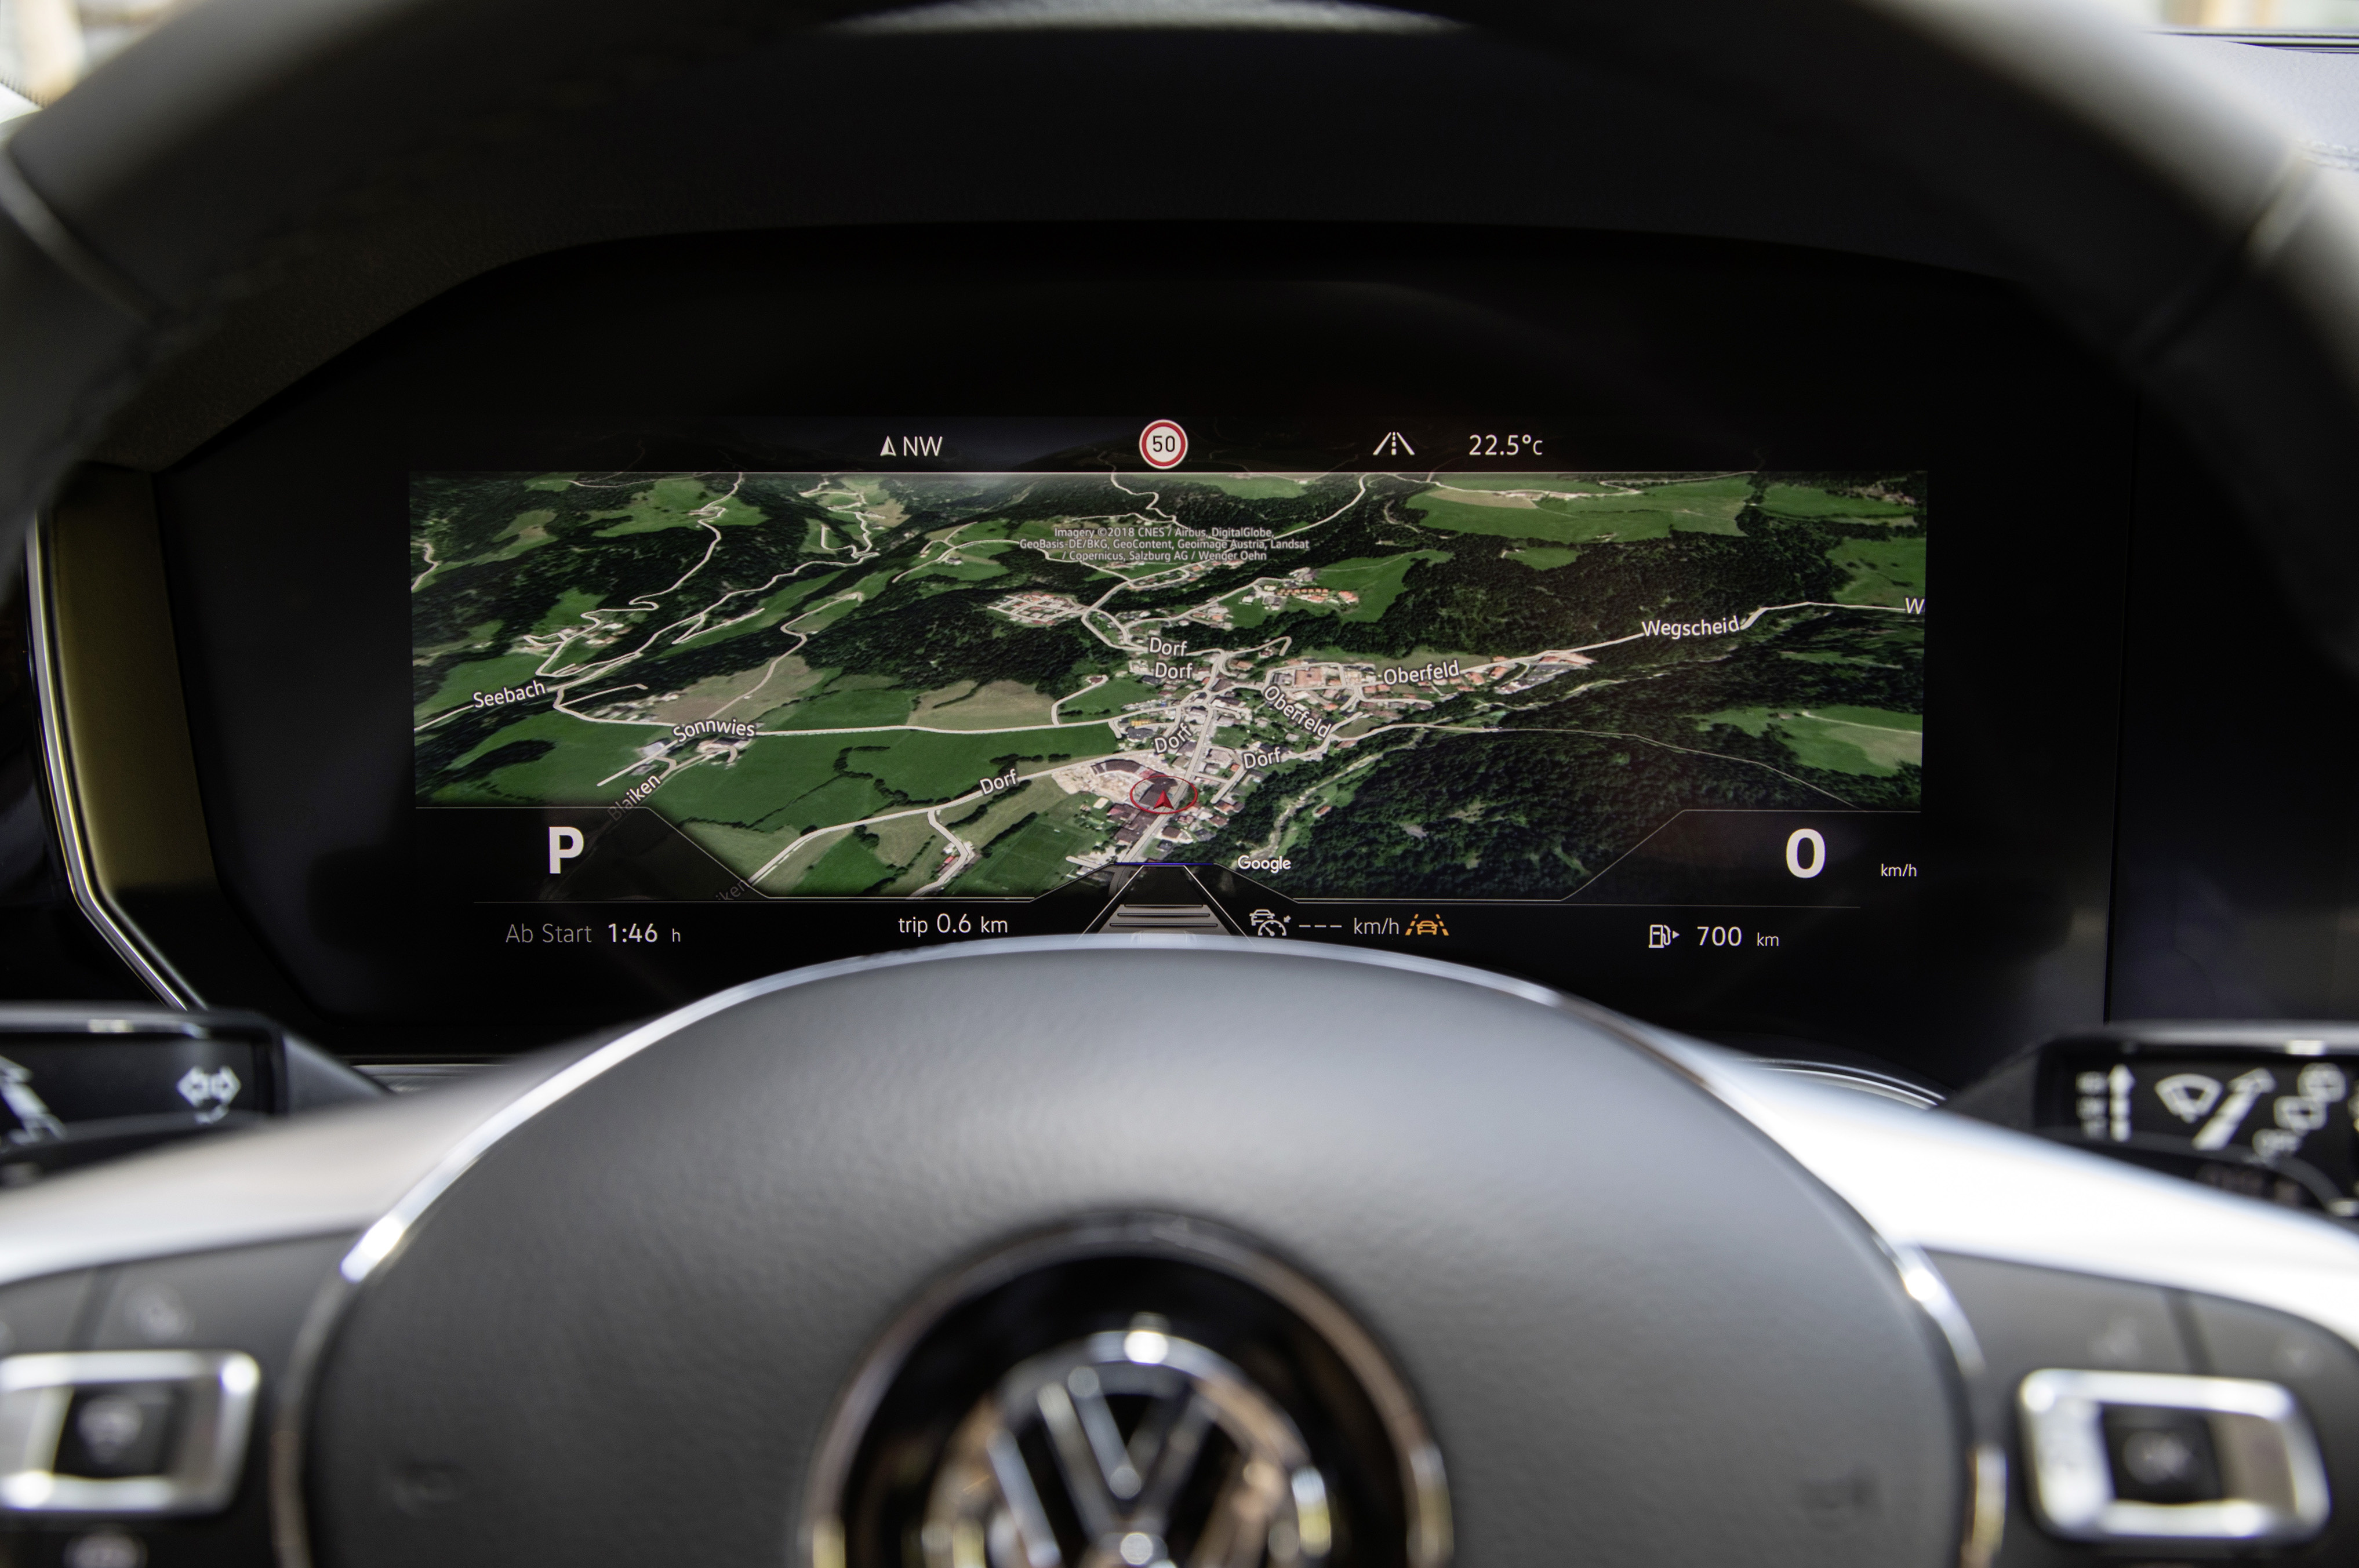 World debut in the “Innovision Cockpit” of the new Volkswagen Touareg.